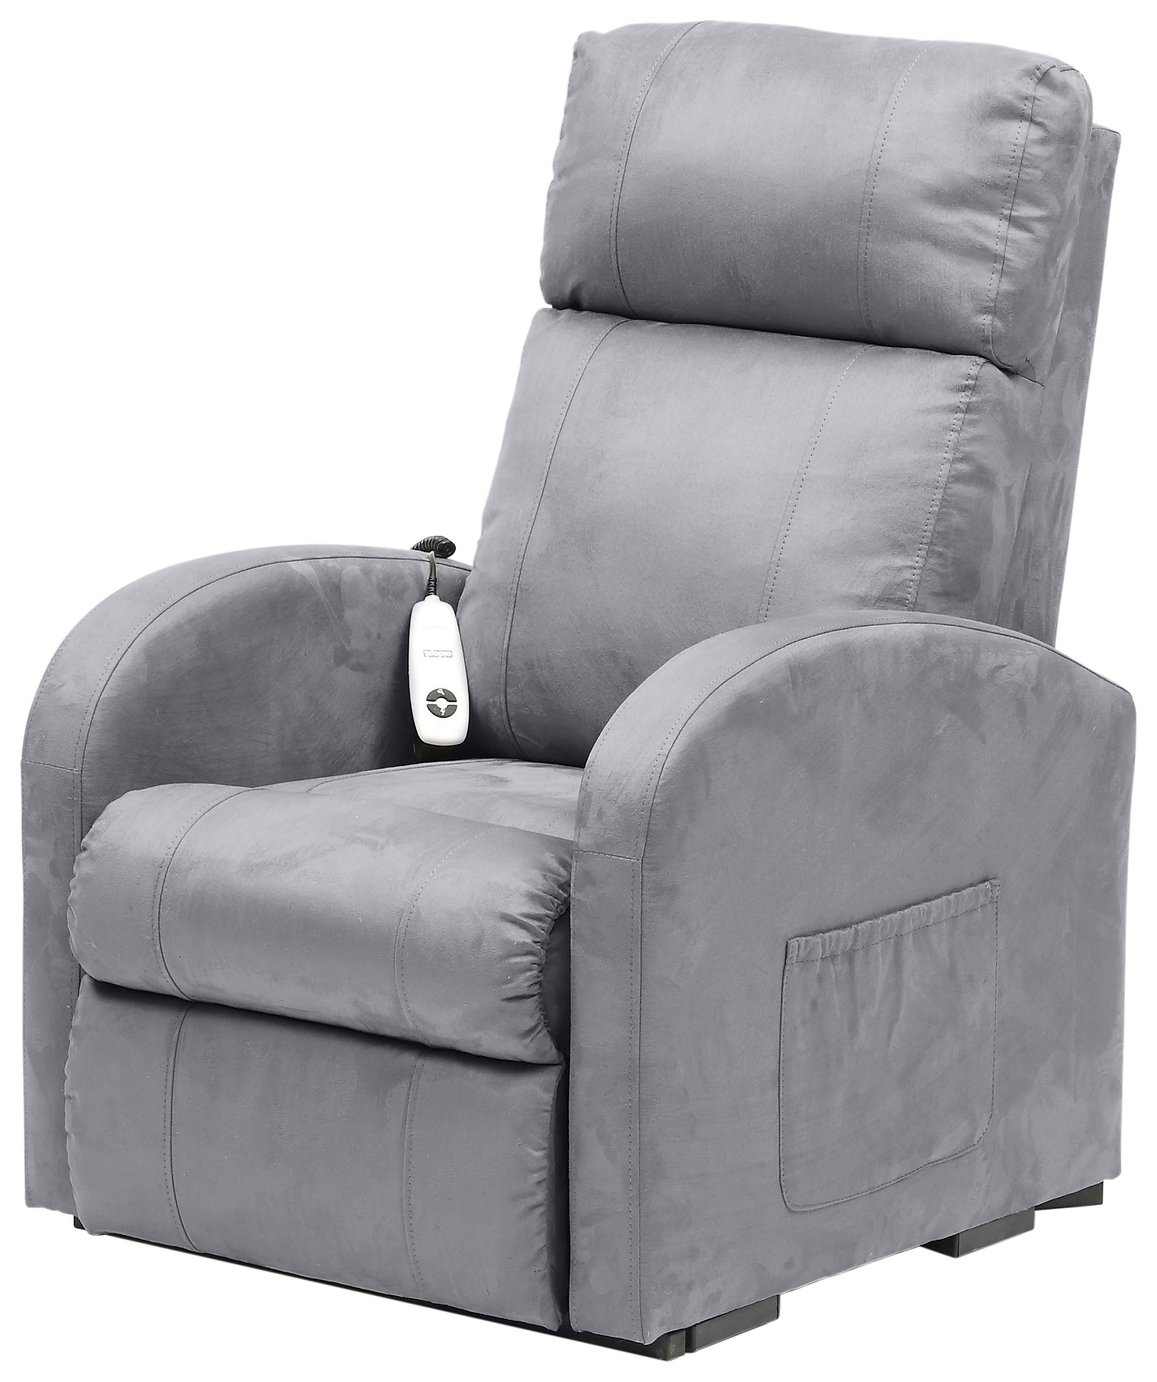 Argos Home Daresbury Rise and Recline Chair - Grey